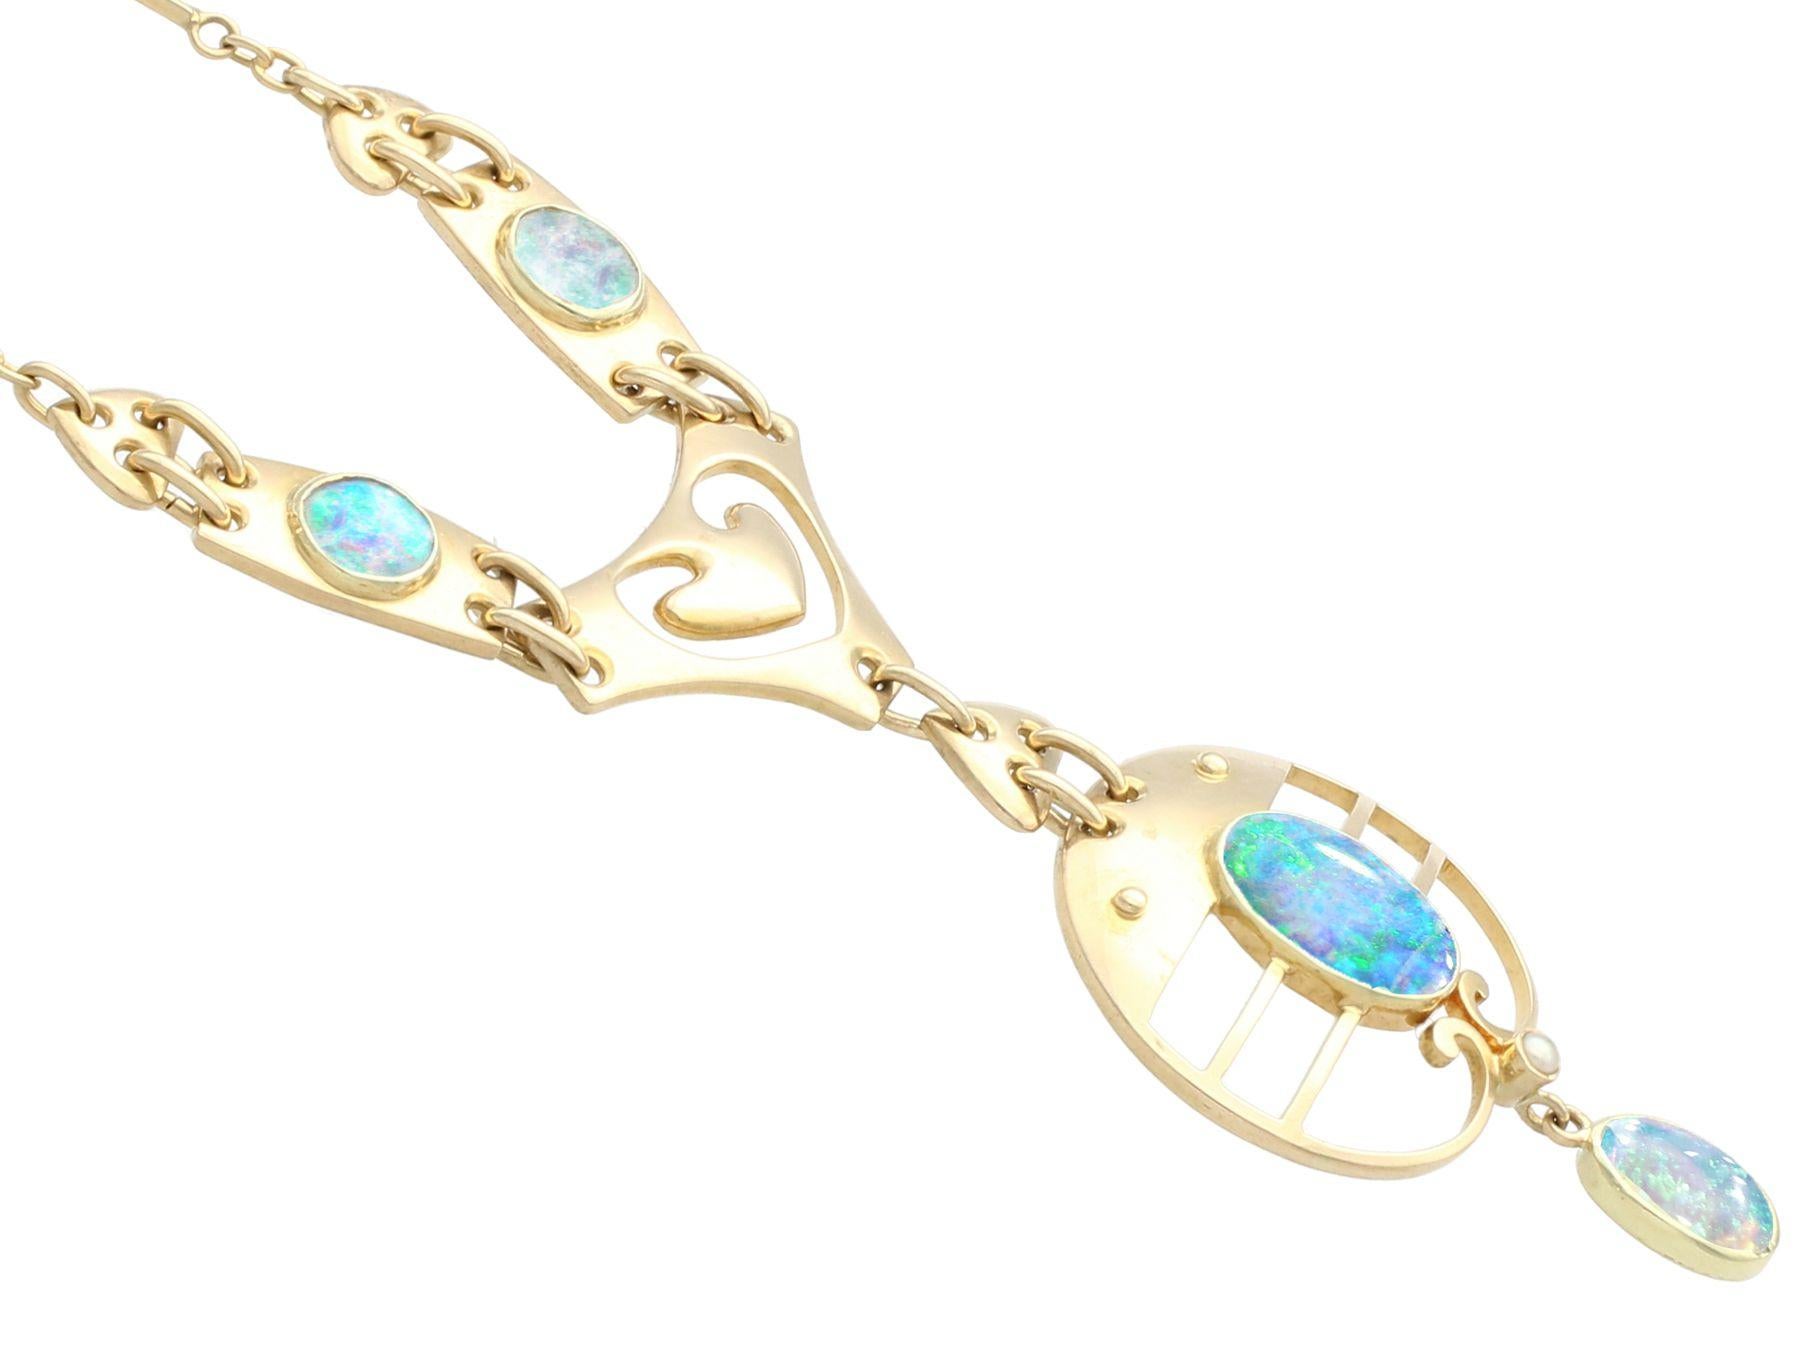 Art Nouveau 2.62 Carat Opal and Yellow Gold Necklace In Excellent Condition For Sale In Jesmond, Newcastle Upon Tyne